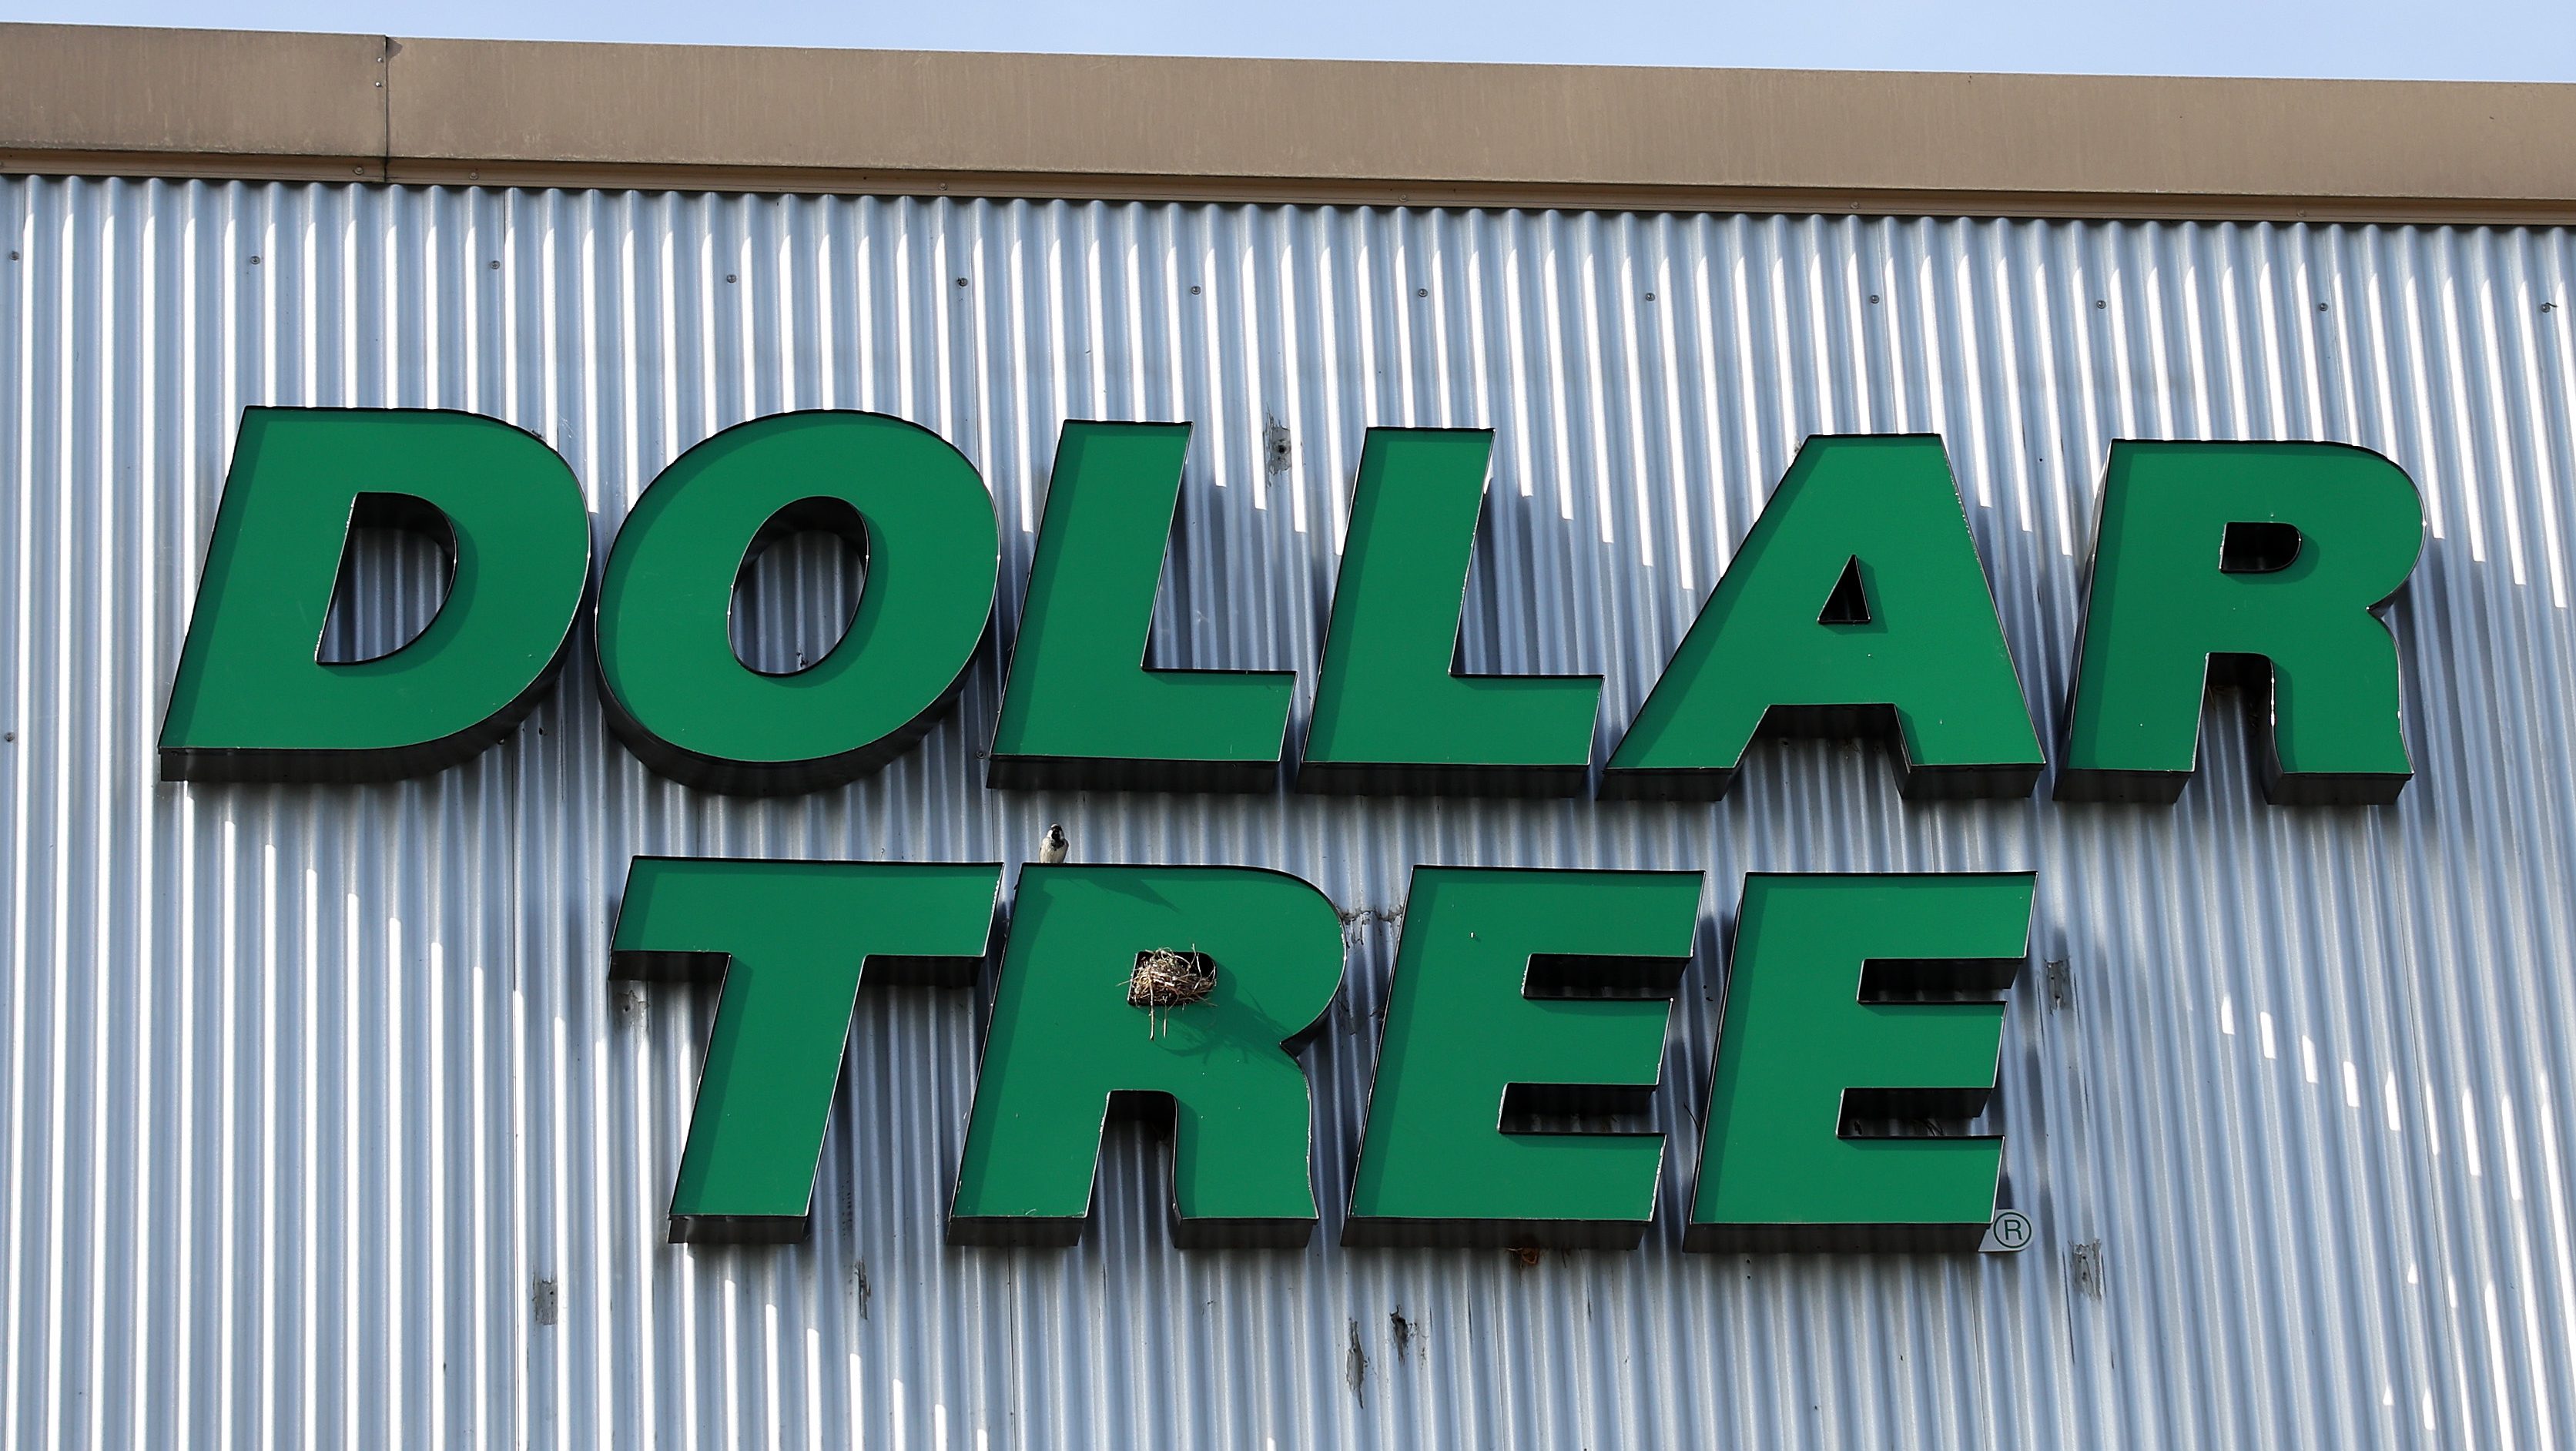 Dollar Tree announces plans to close stores - Marketplace